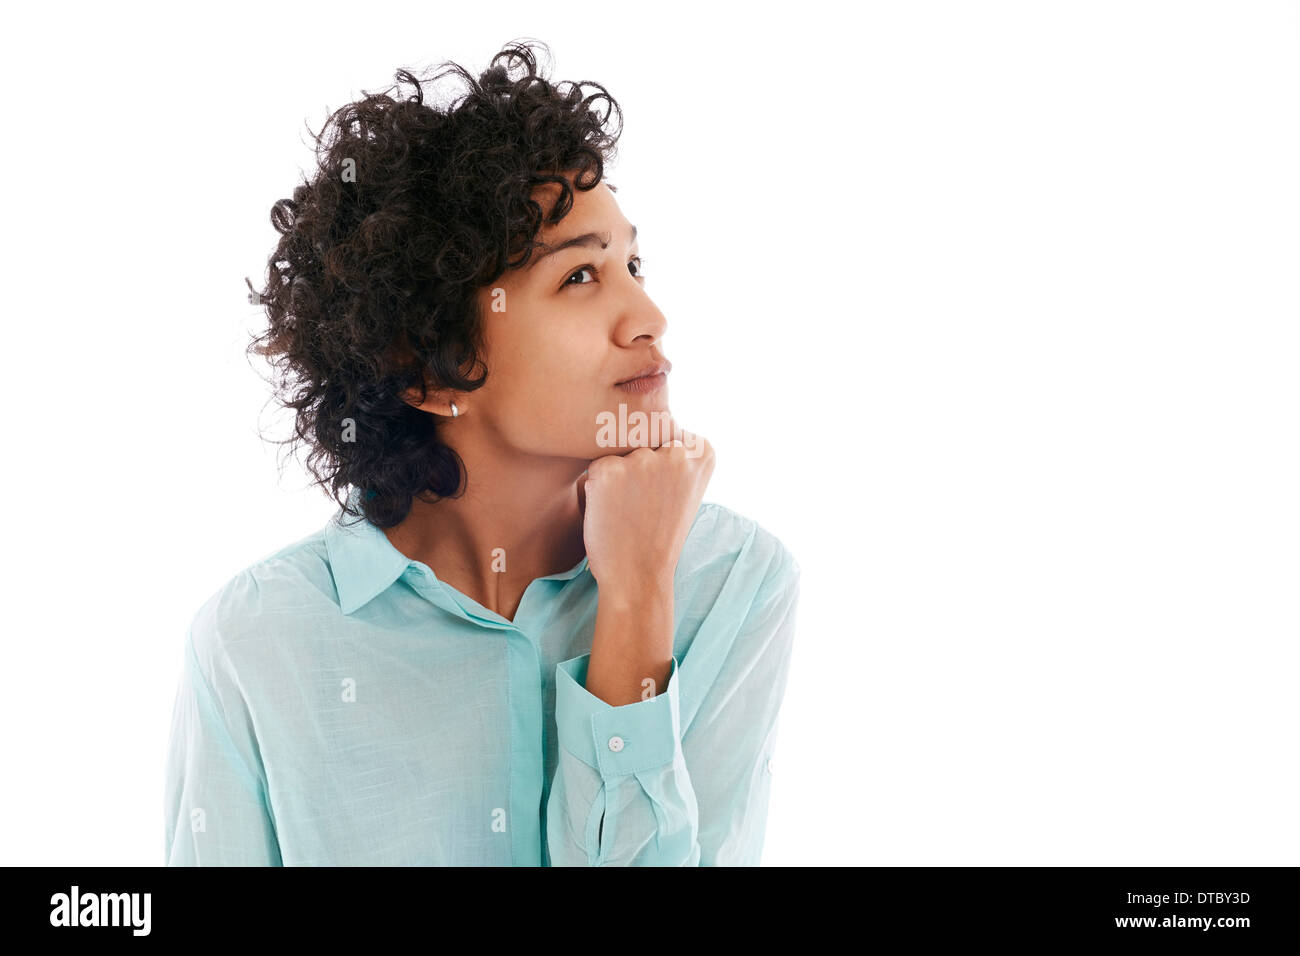 Portrait of confused and uncertain hispanic business woman on white background Stock Photo